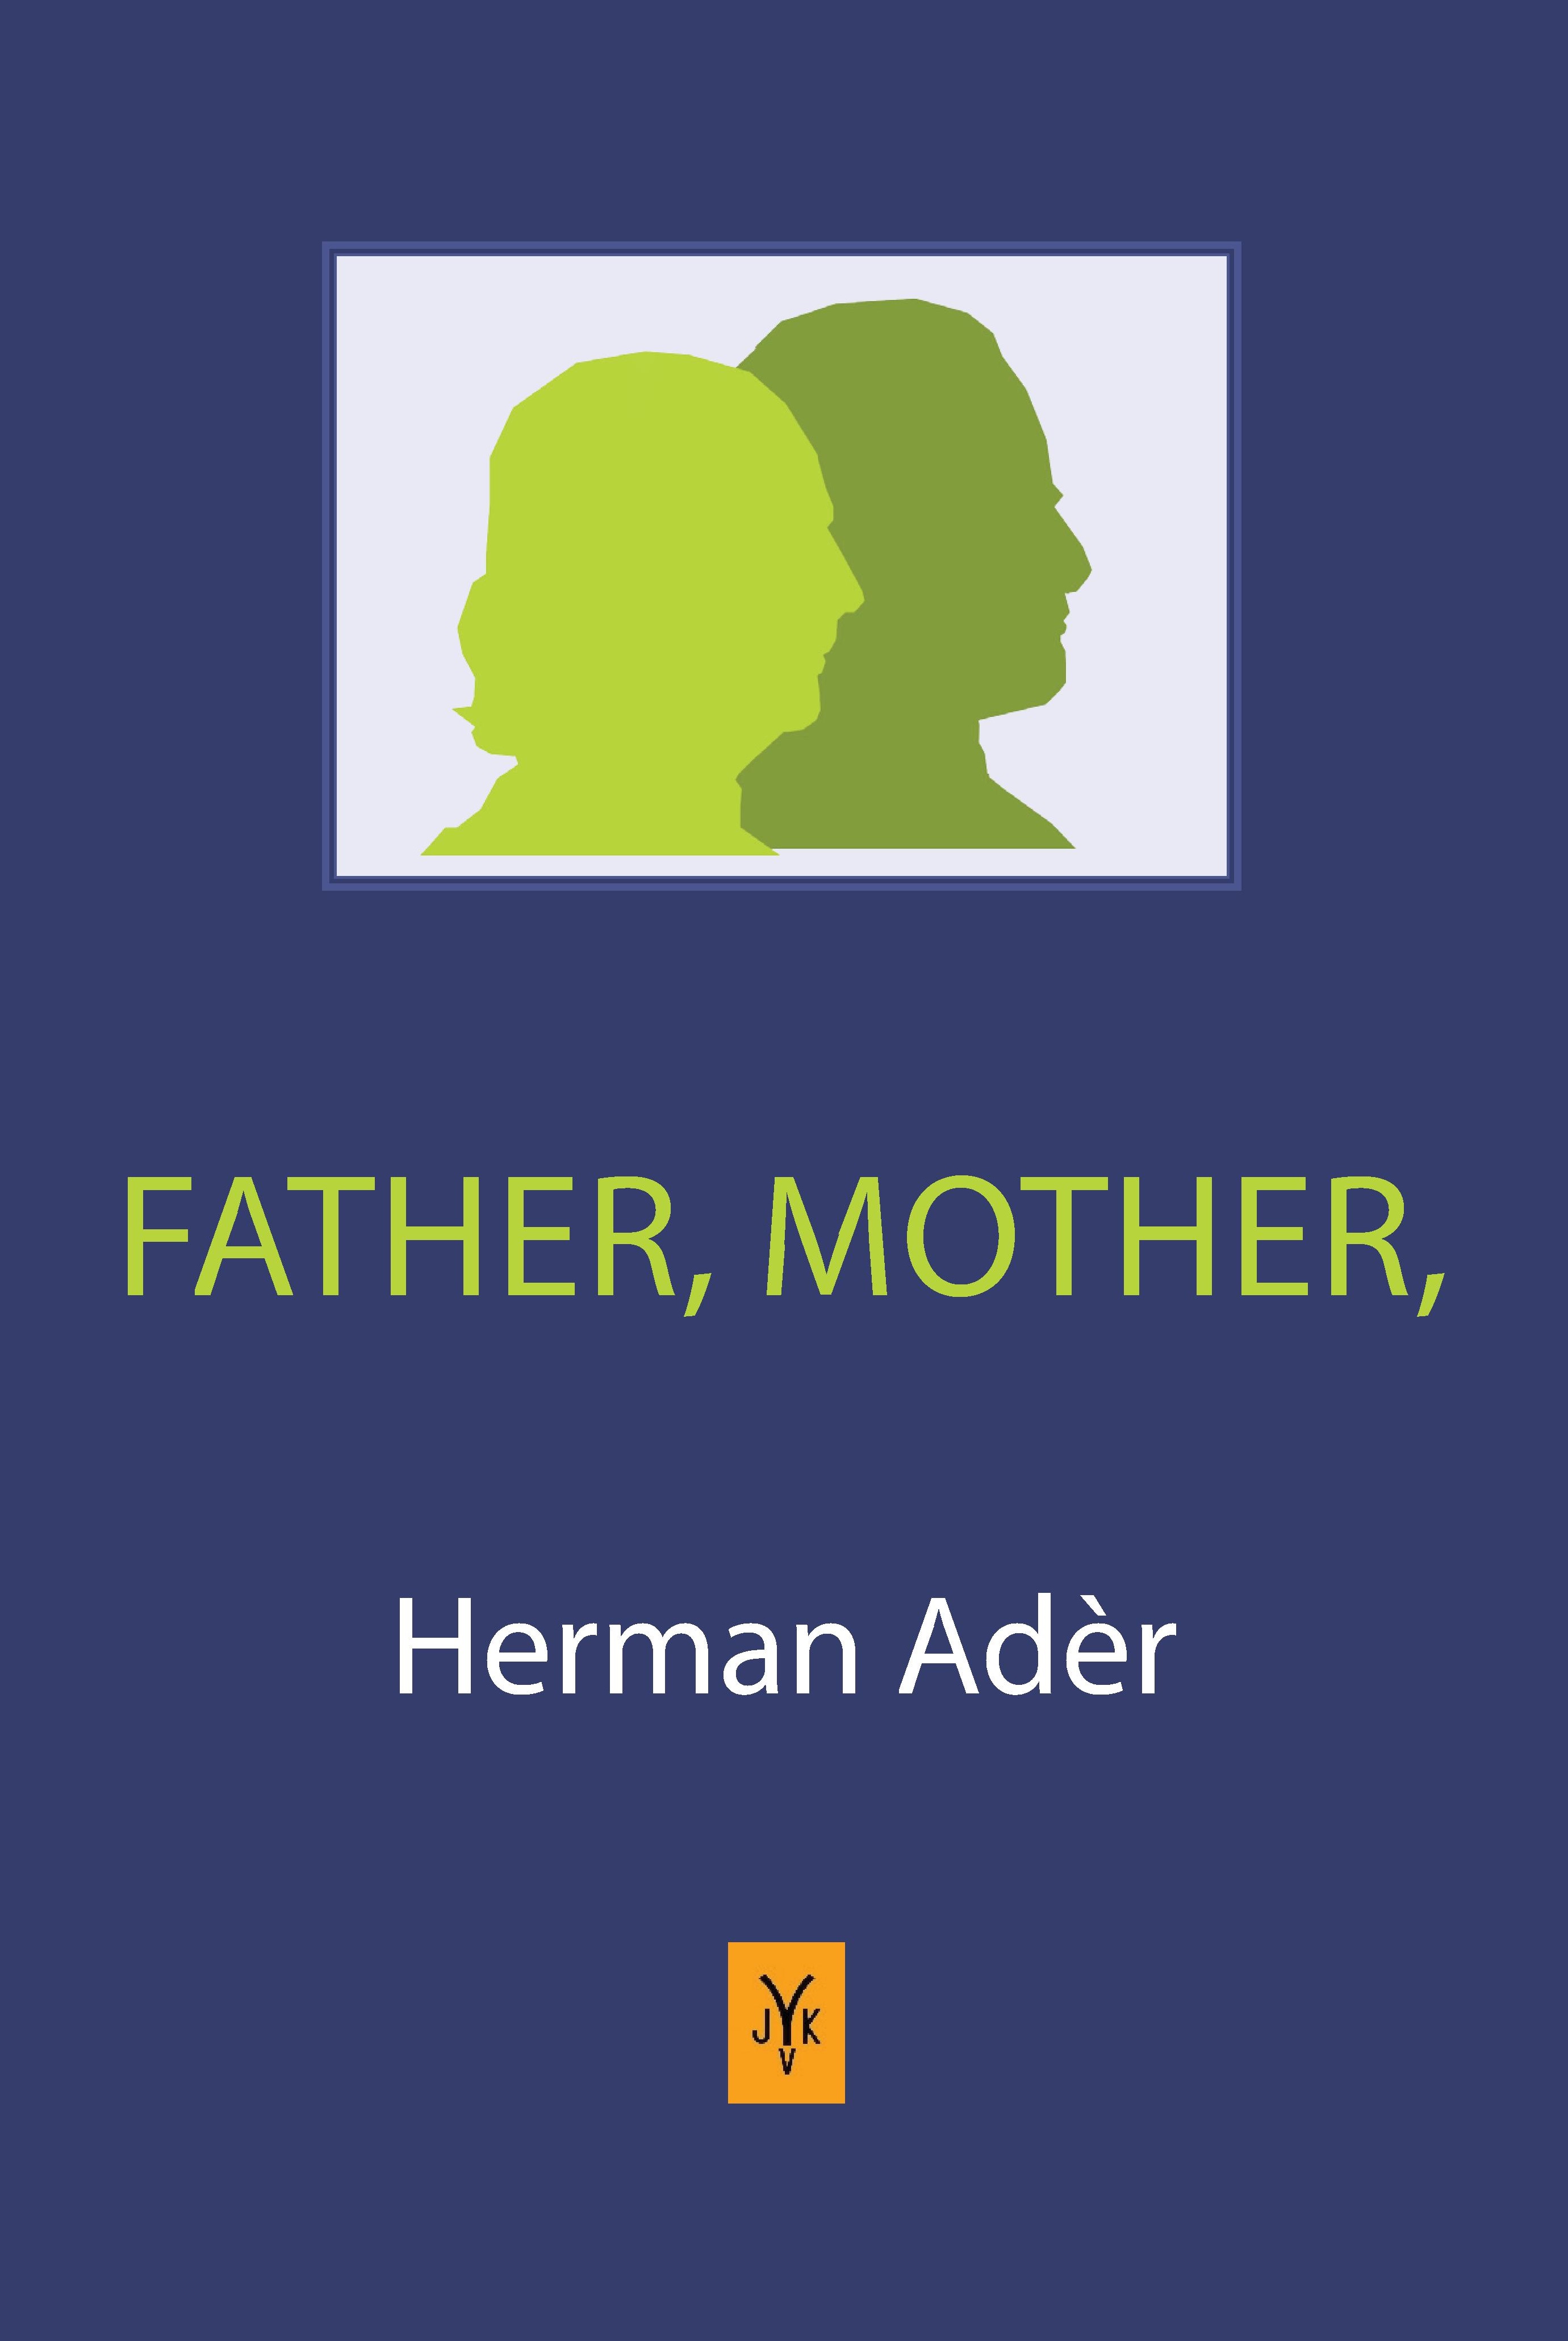 Father, Mother,